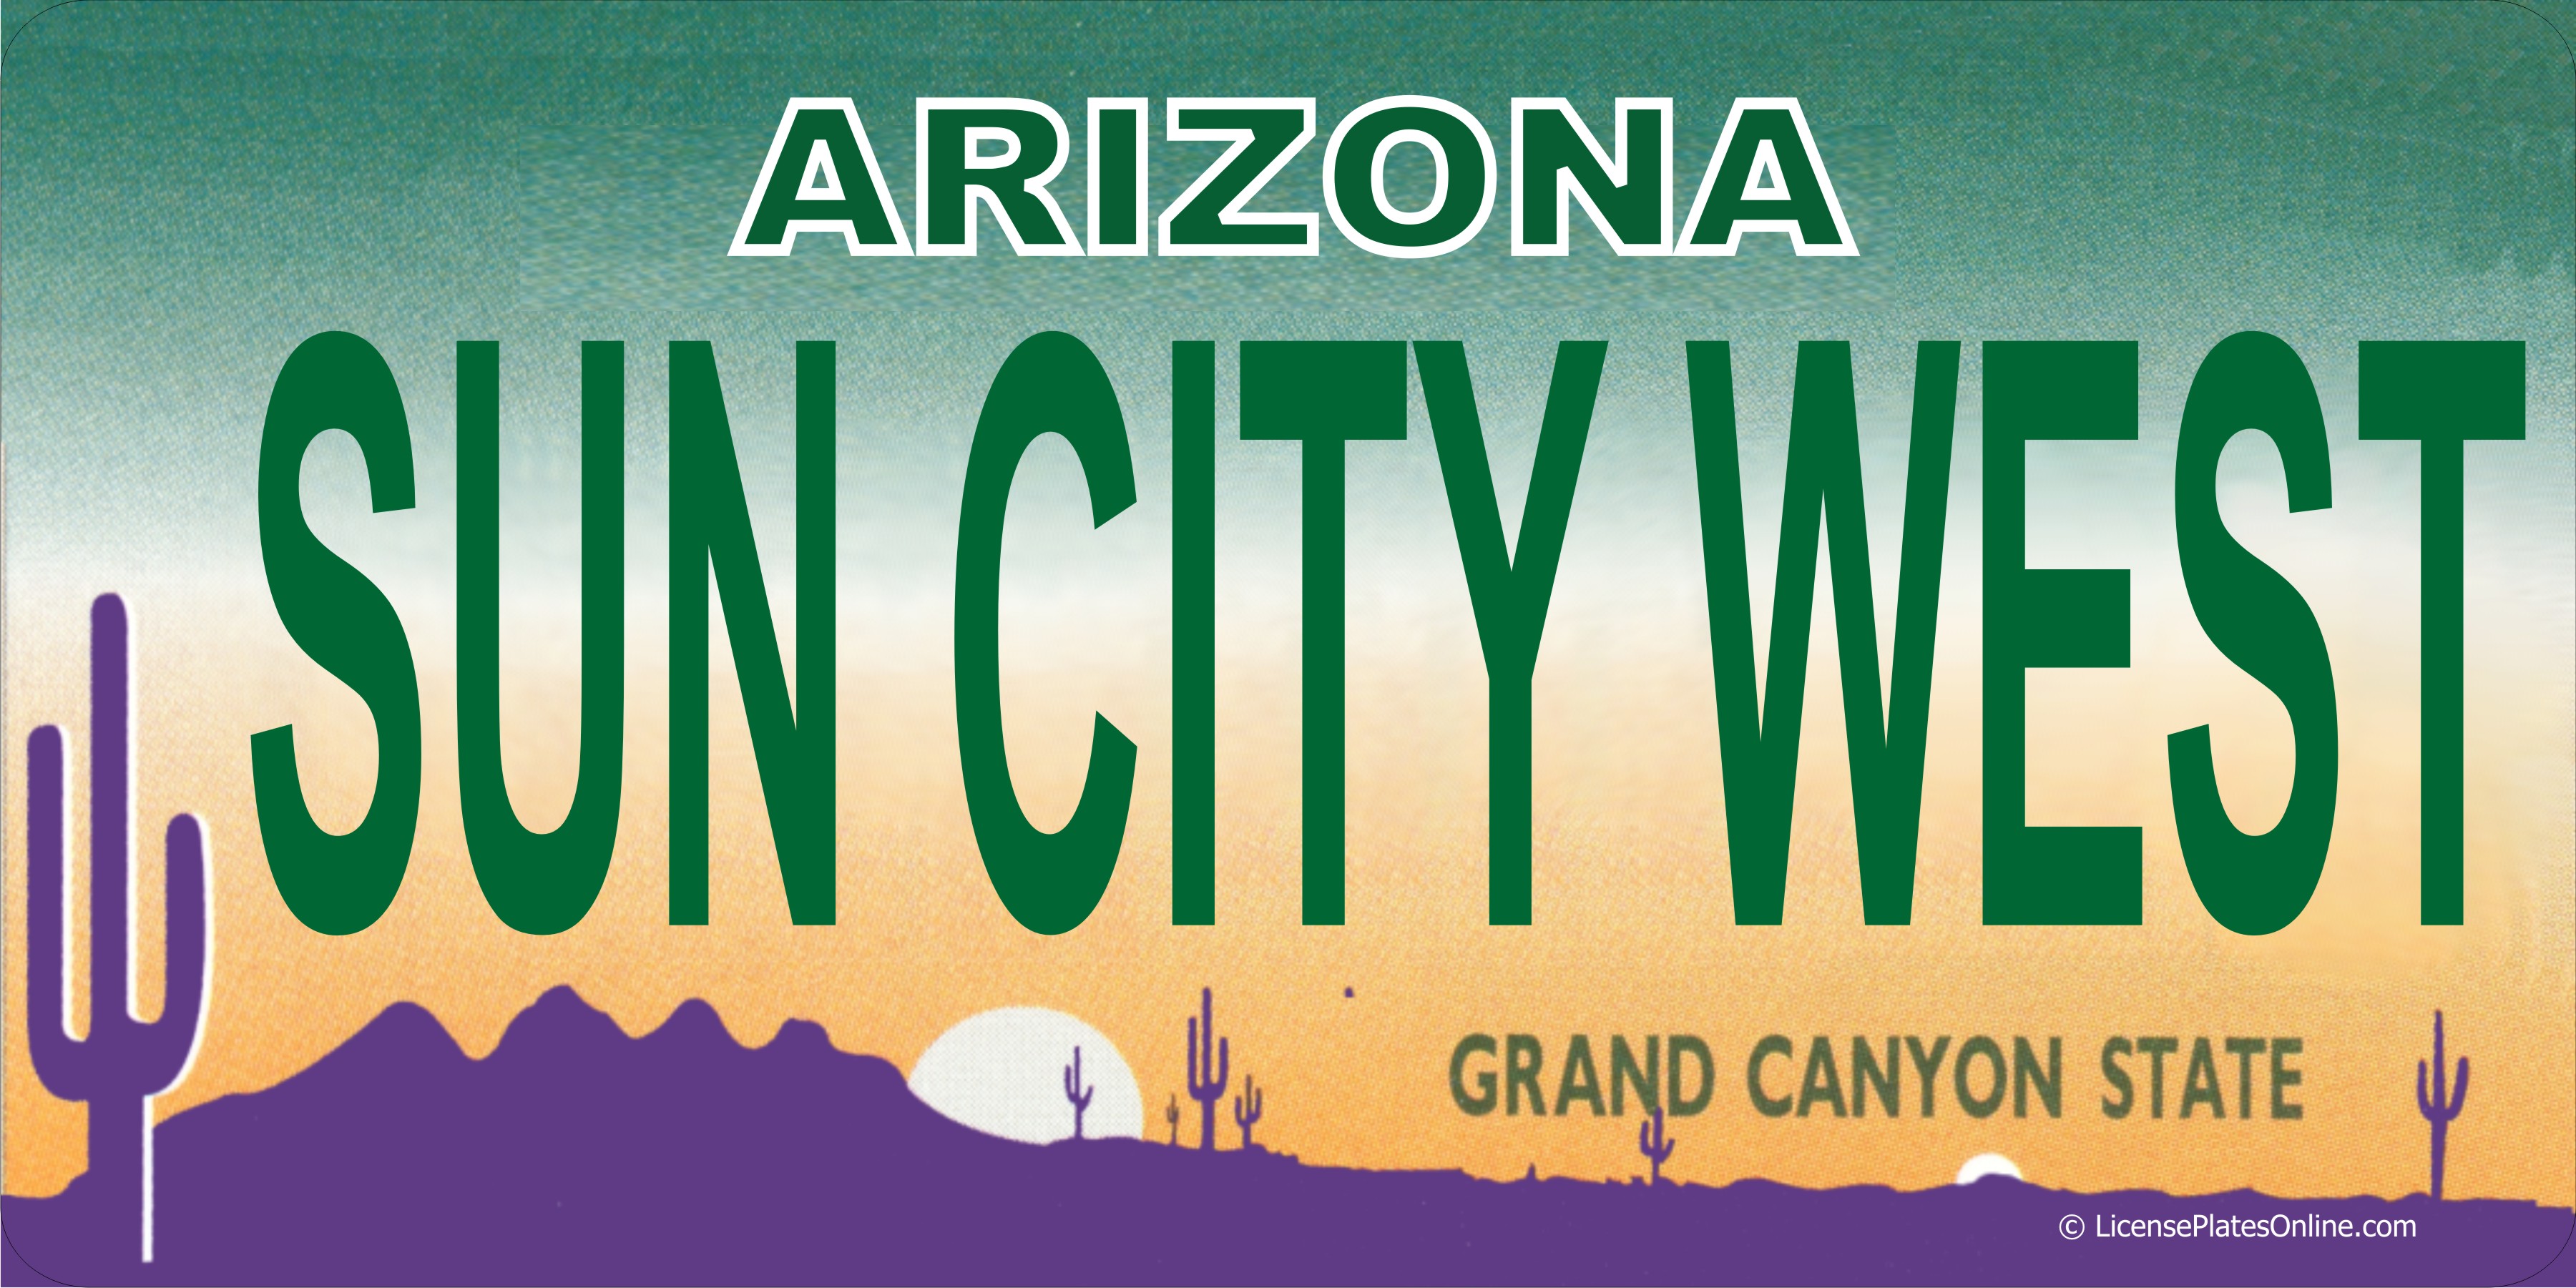 Arizona SUN CITY WEST Photo LICENSE PLATE   Free Personalization on this PLATE